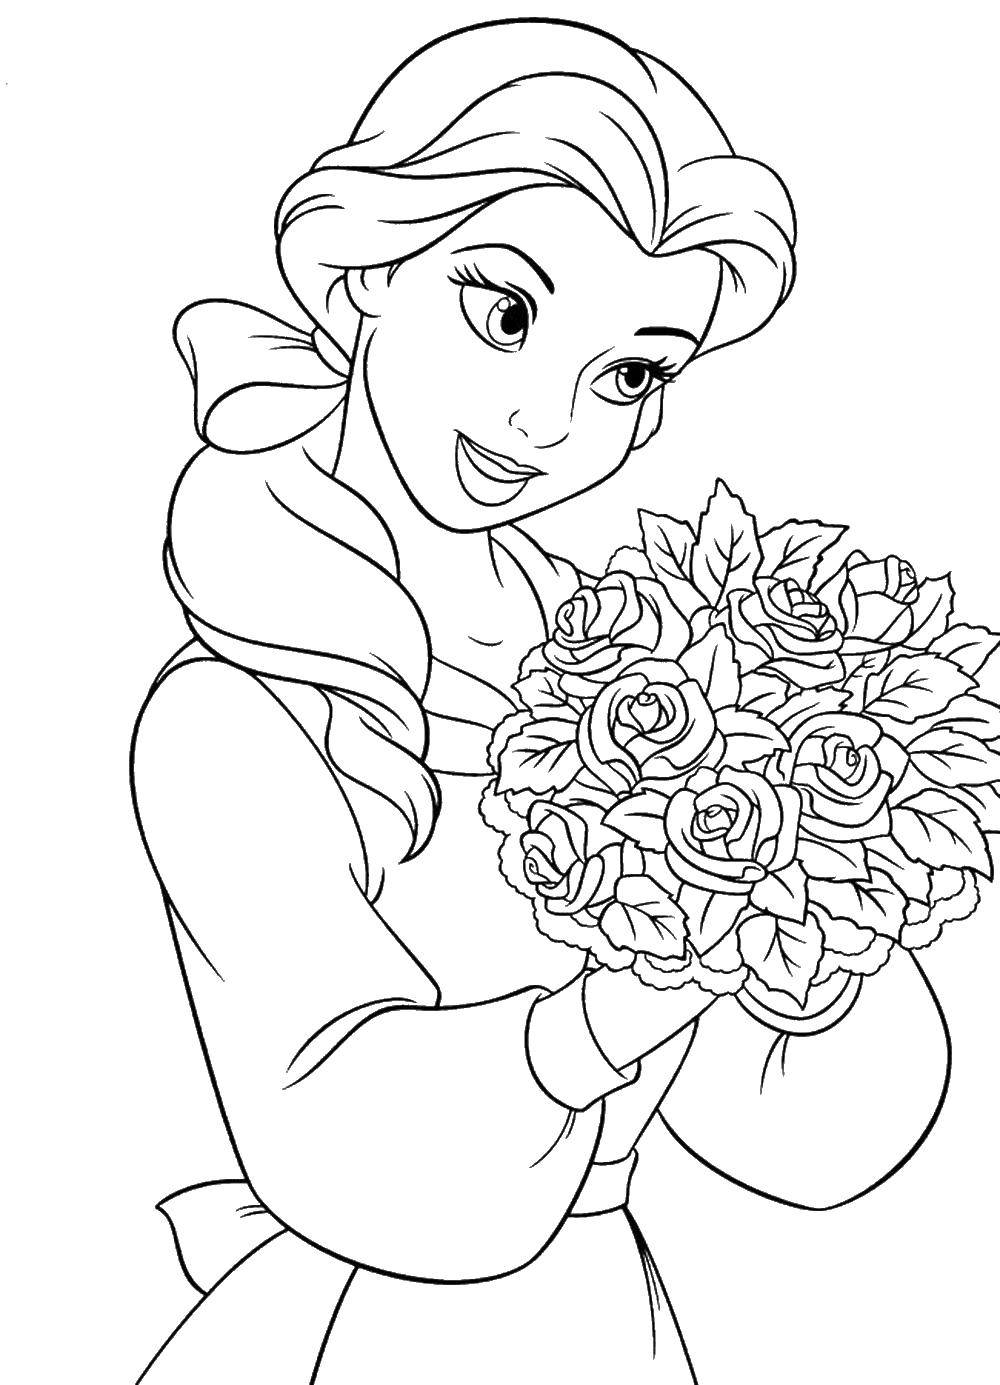 Coloring A bunch of bell. Category Disney coloring pages. Tags:  Beauty and the Beast, Disney.